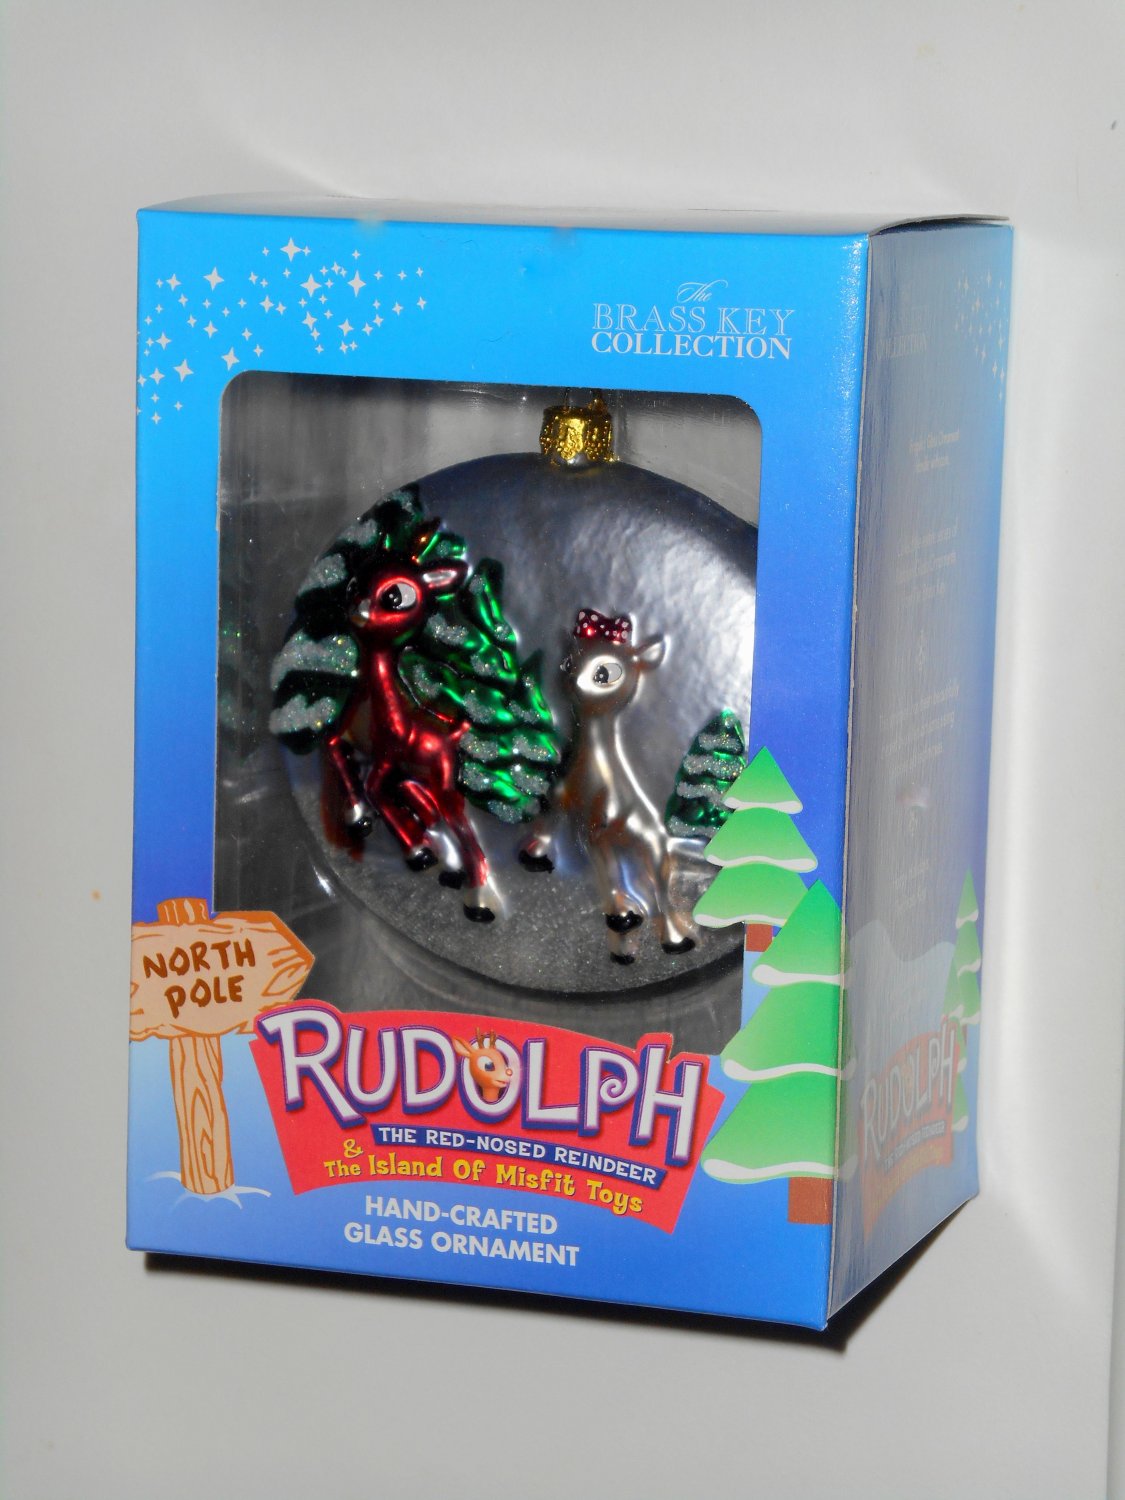 Rudolph Clarice Hand Crafted Glass Ornament Rudolph & the Island of Misfit Toys Brass Key NIB